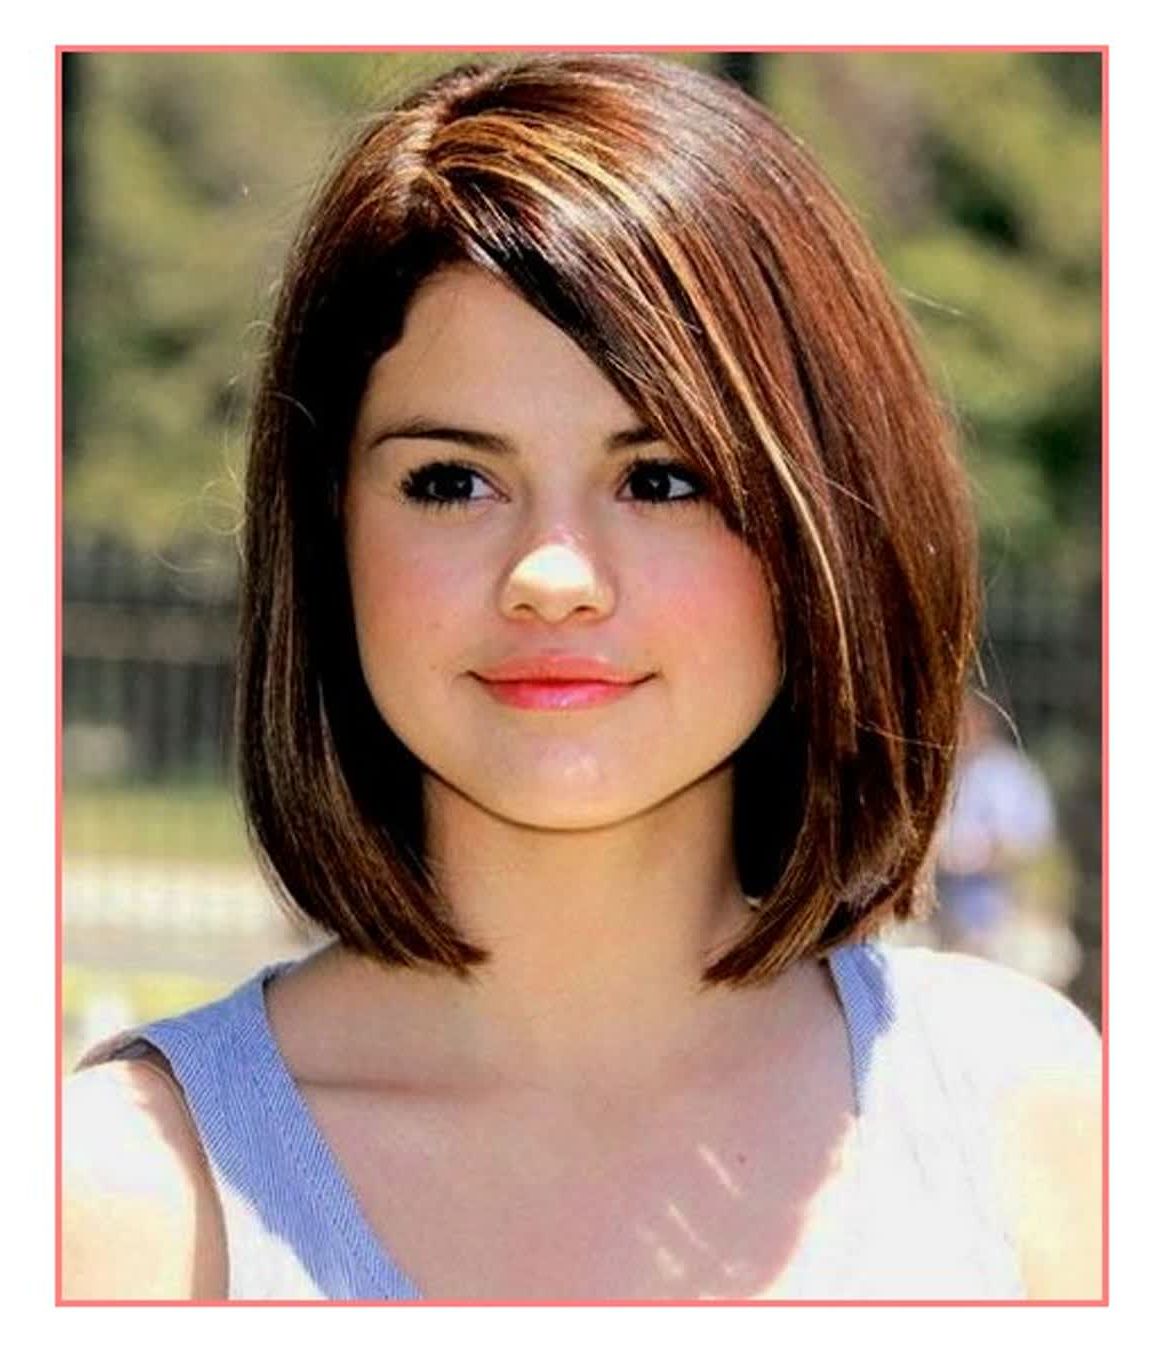 Hair Cuts : Short Haircuts For Ladies With Thick Hair Women Over Regarding Short Medium Haircuts For Thick Hair (View 19 of 25)